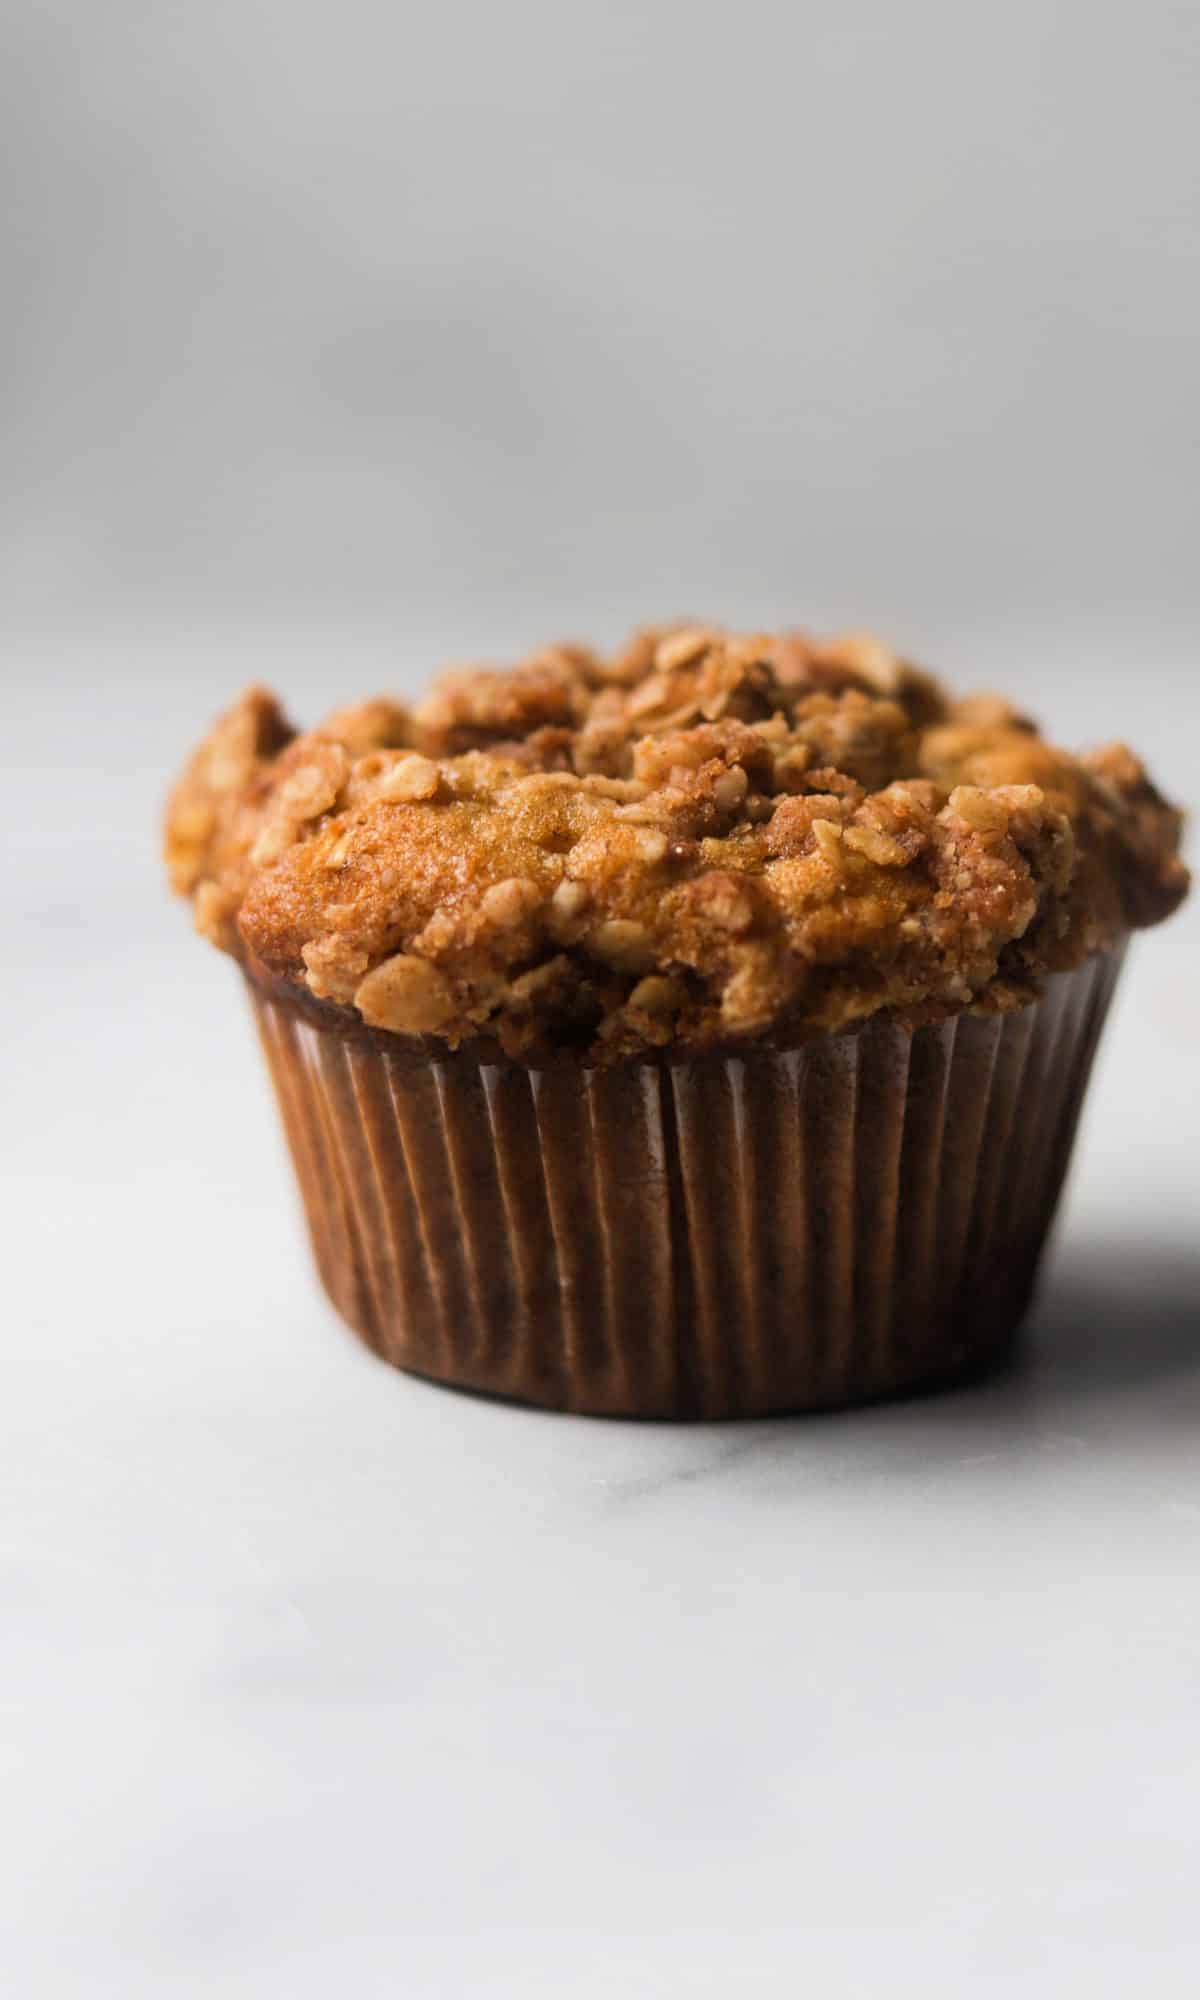 A side shot of a crumble muffin.